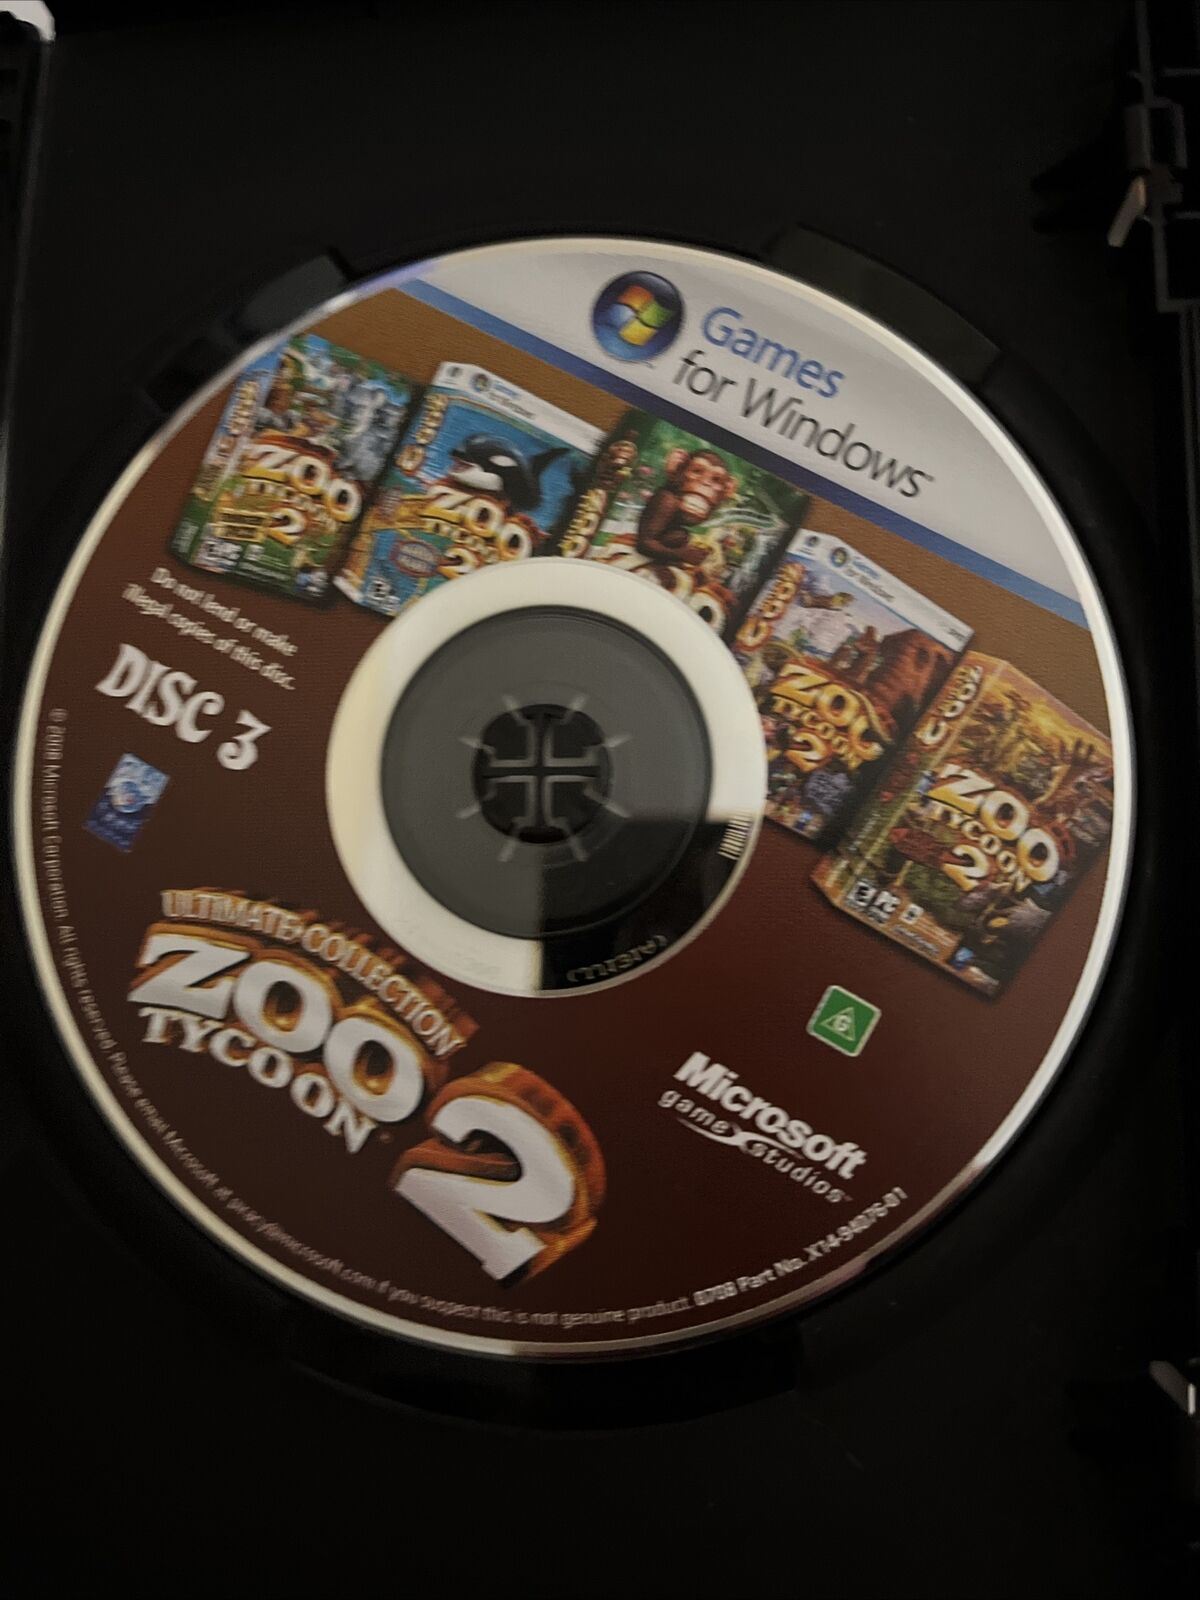 Zoo Tycoon 2 - Ultimate Collection - Win - CD (DVD case) - English - North  America